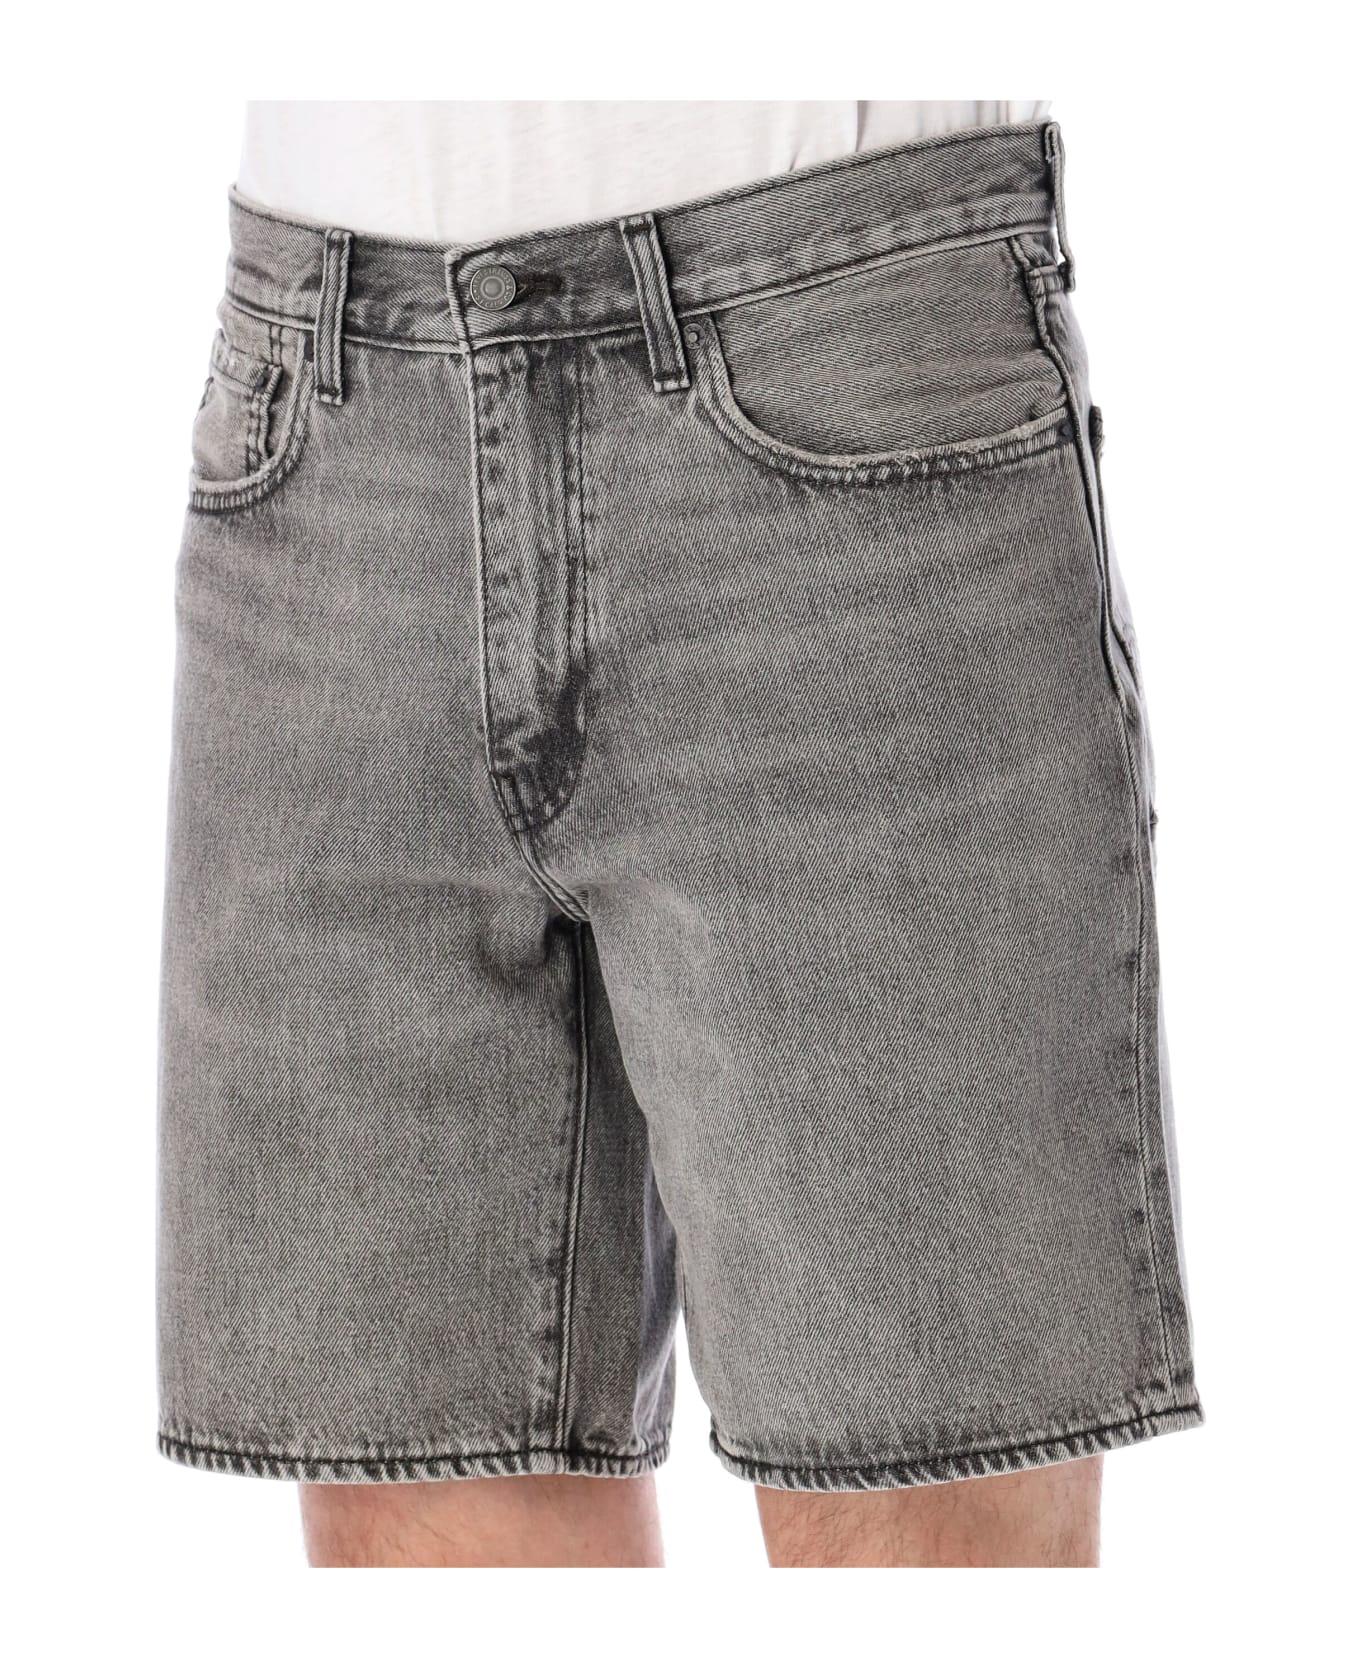 Levi's 468 Stay Loose Shorts - GREY WASH